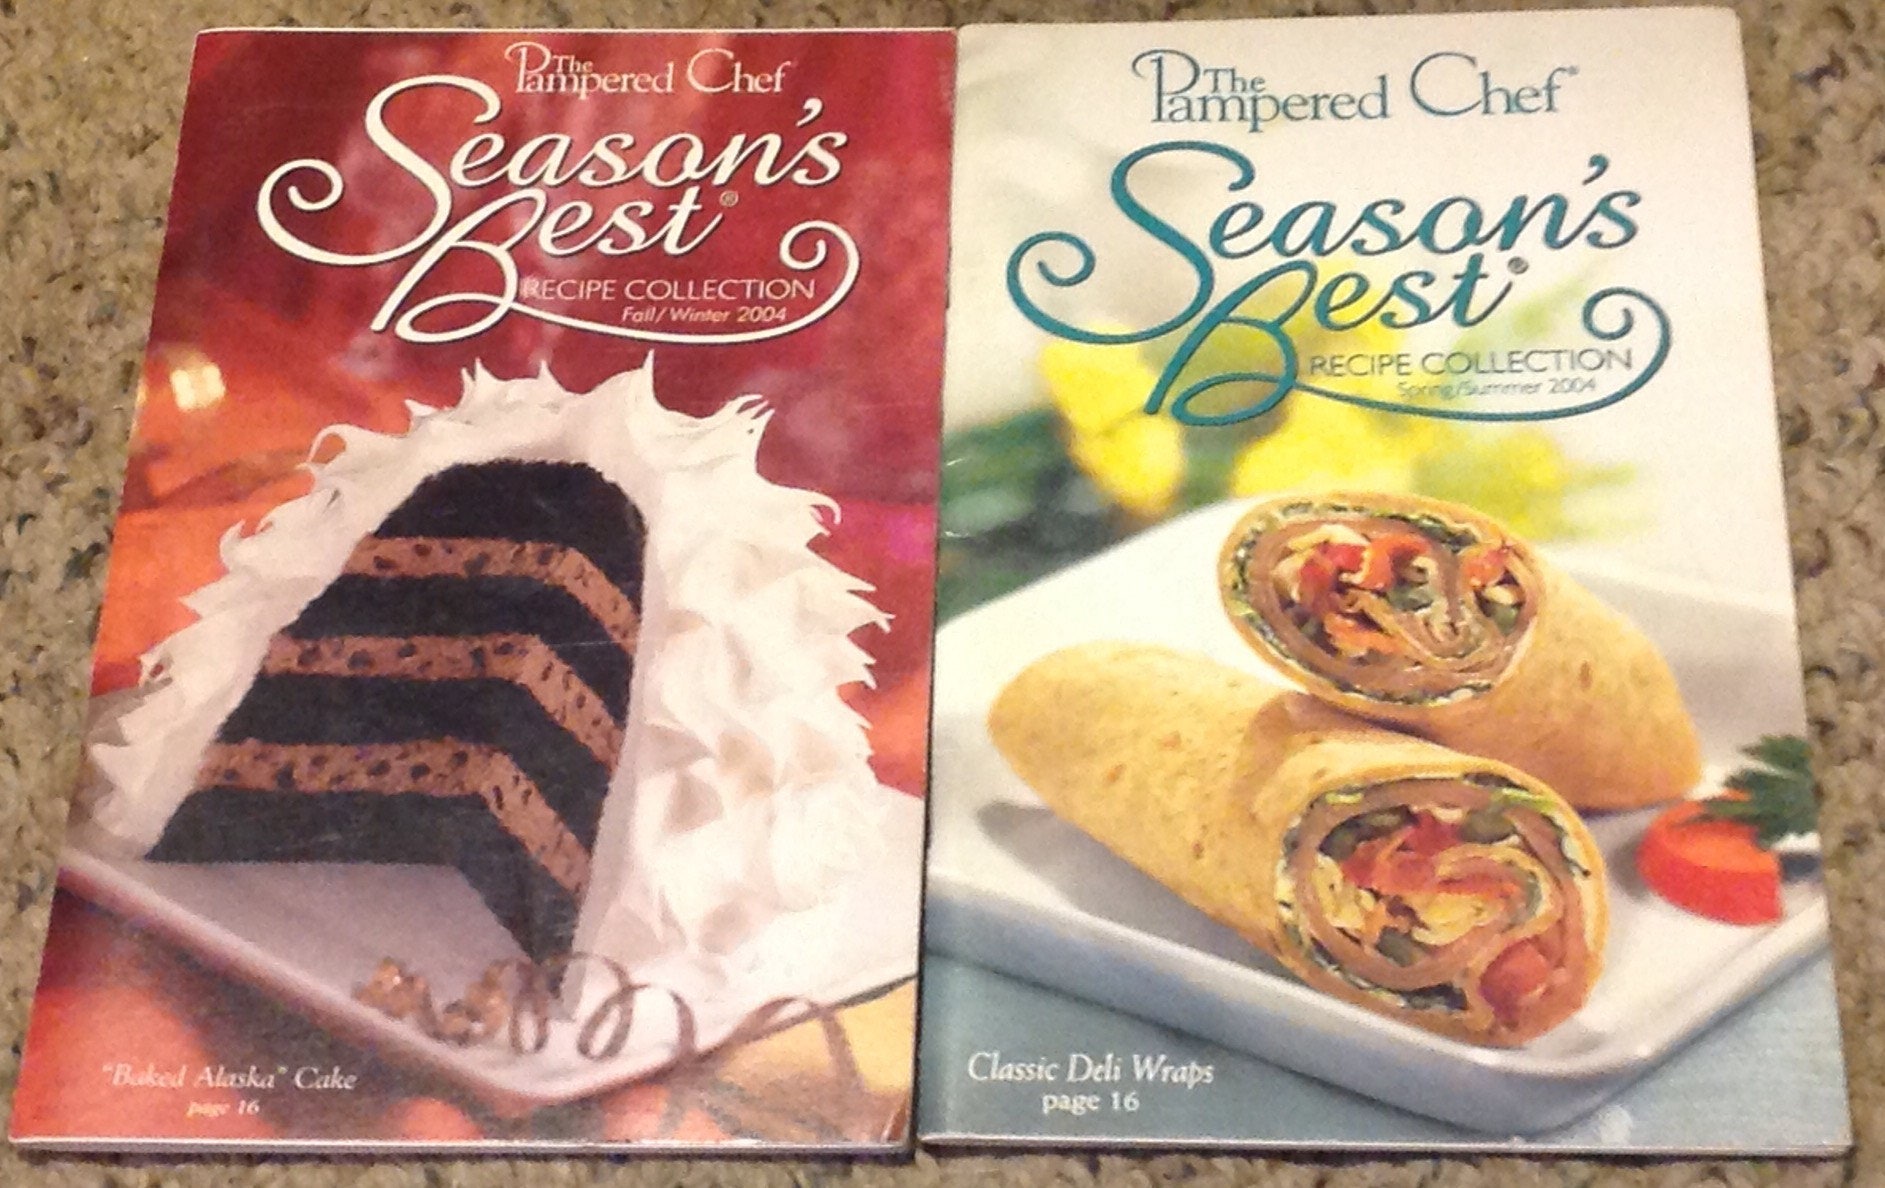 New Pampered Chef Products for the Spring/Summer 2022 Season by PC